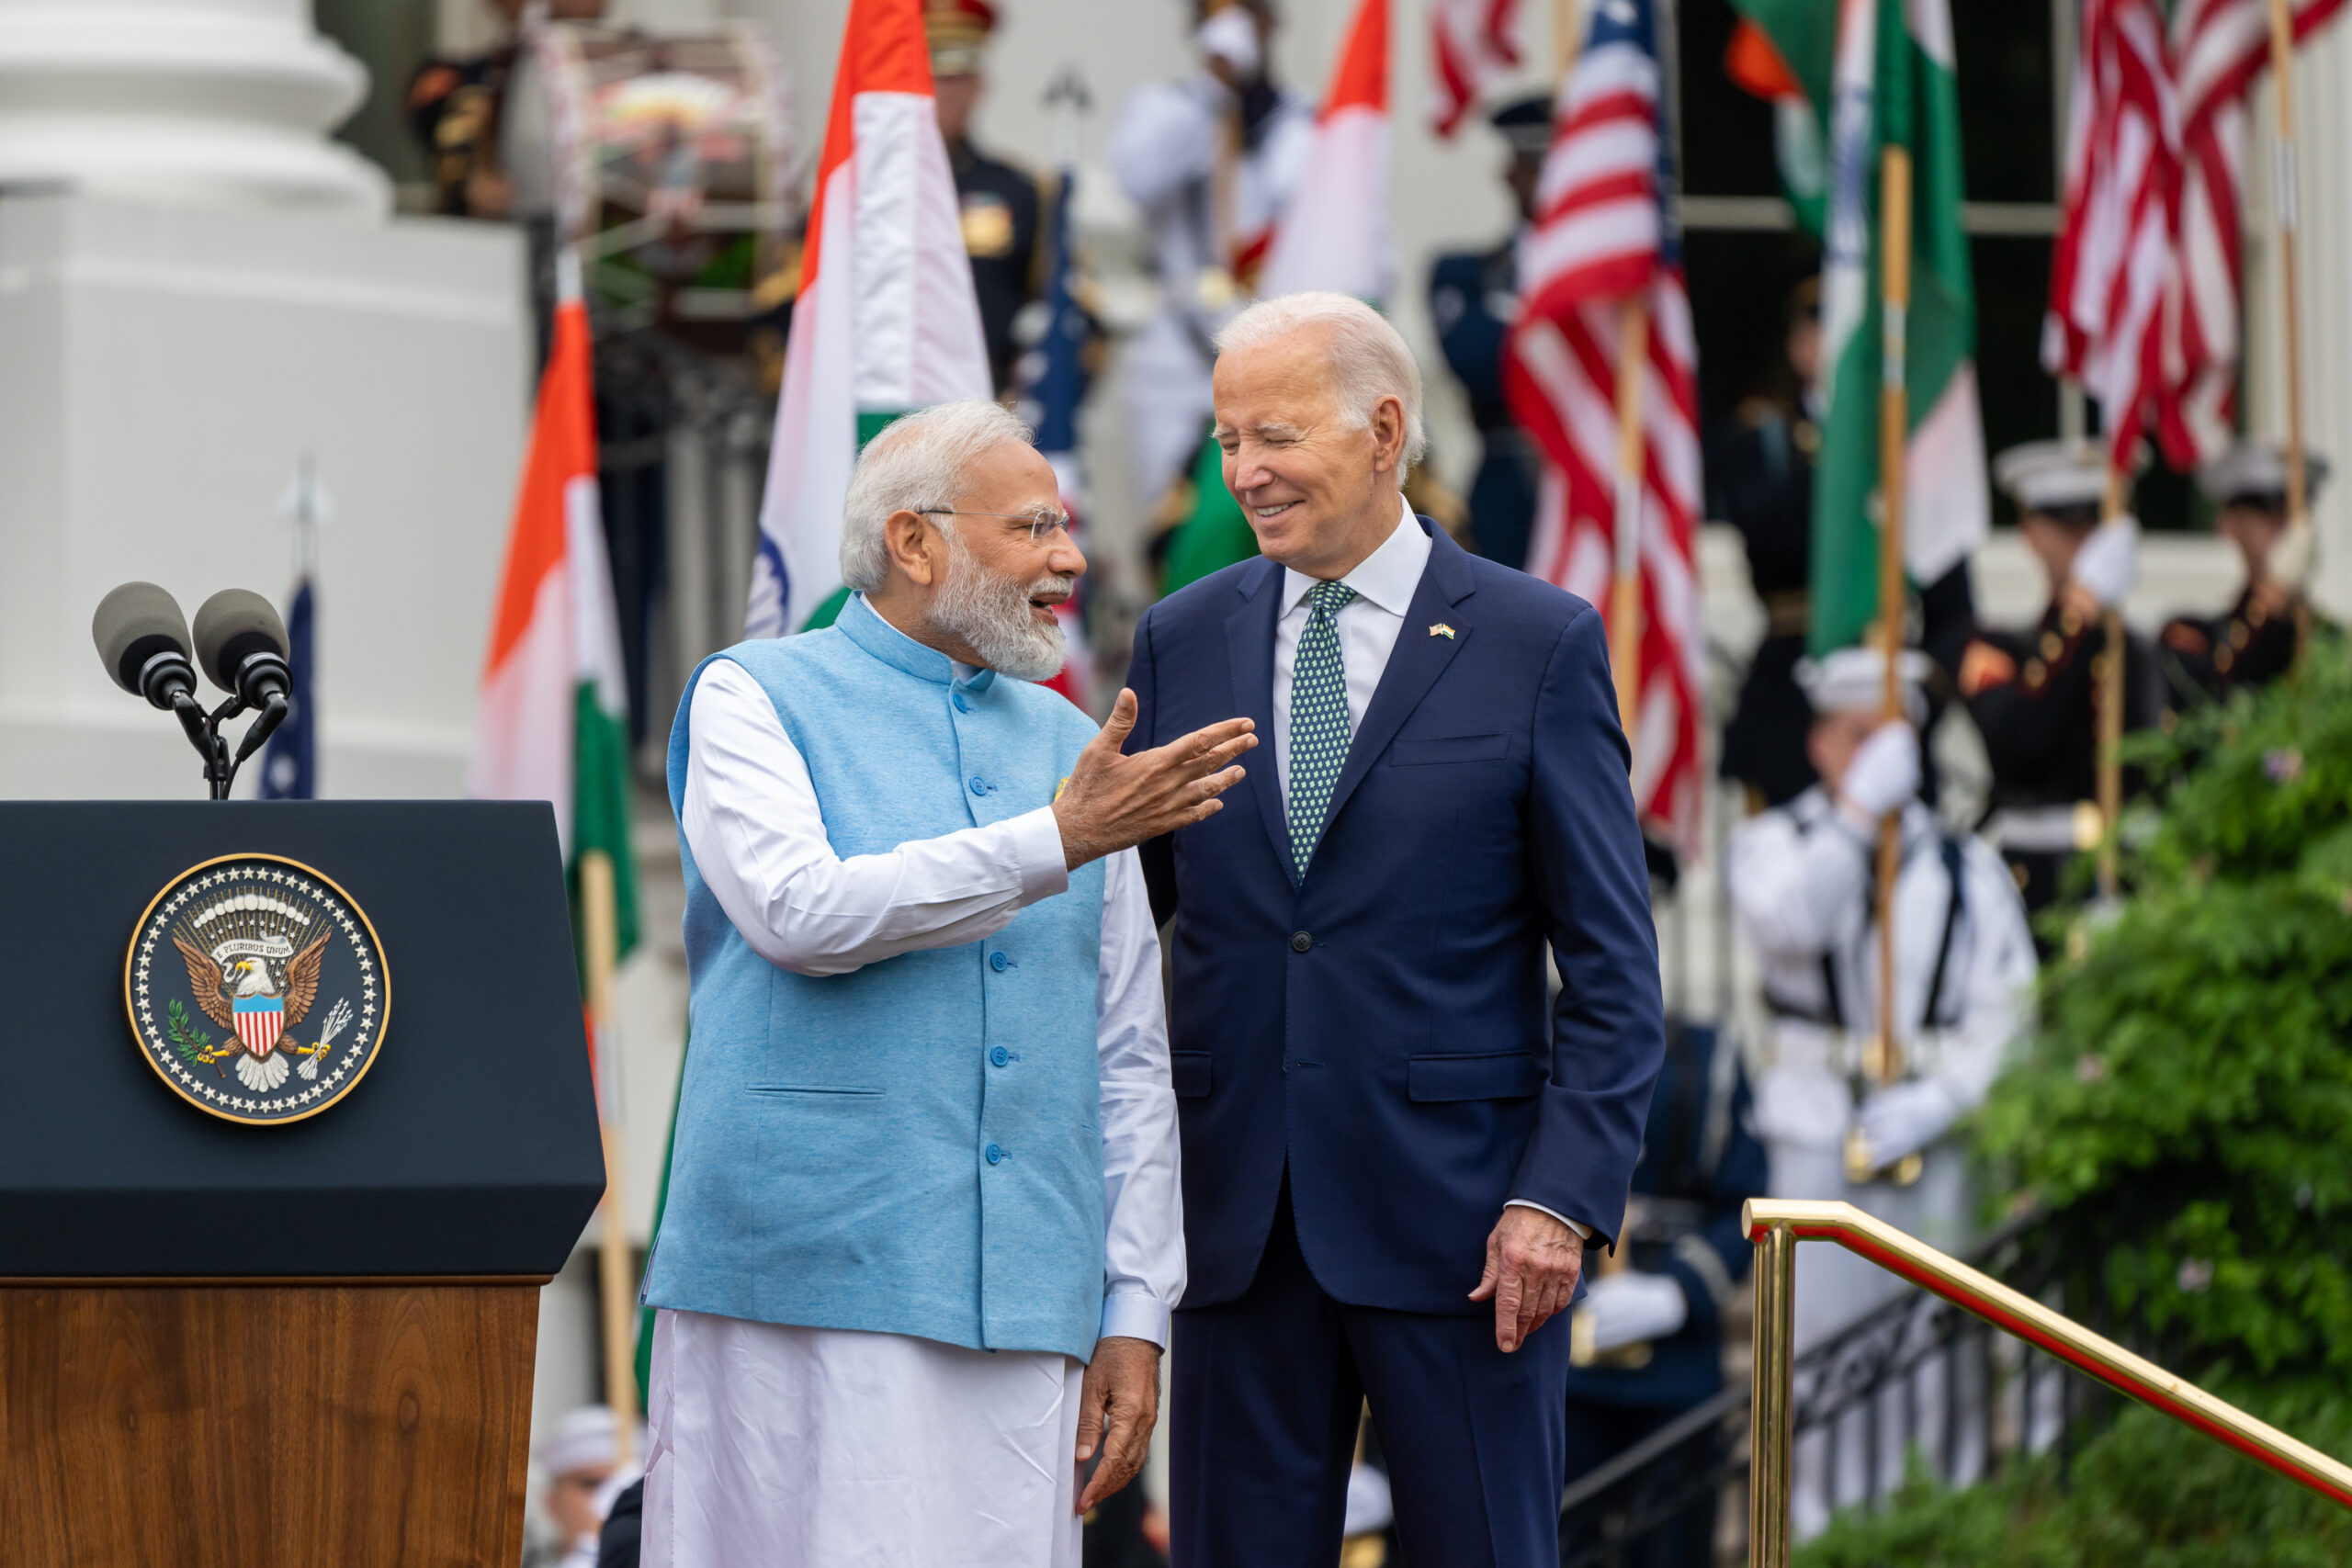 Only 3 Indian businessmen in White House state dinner guest list in PM